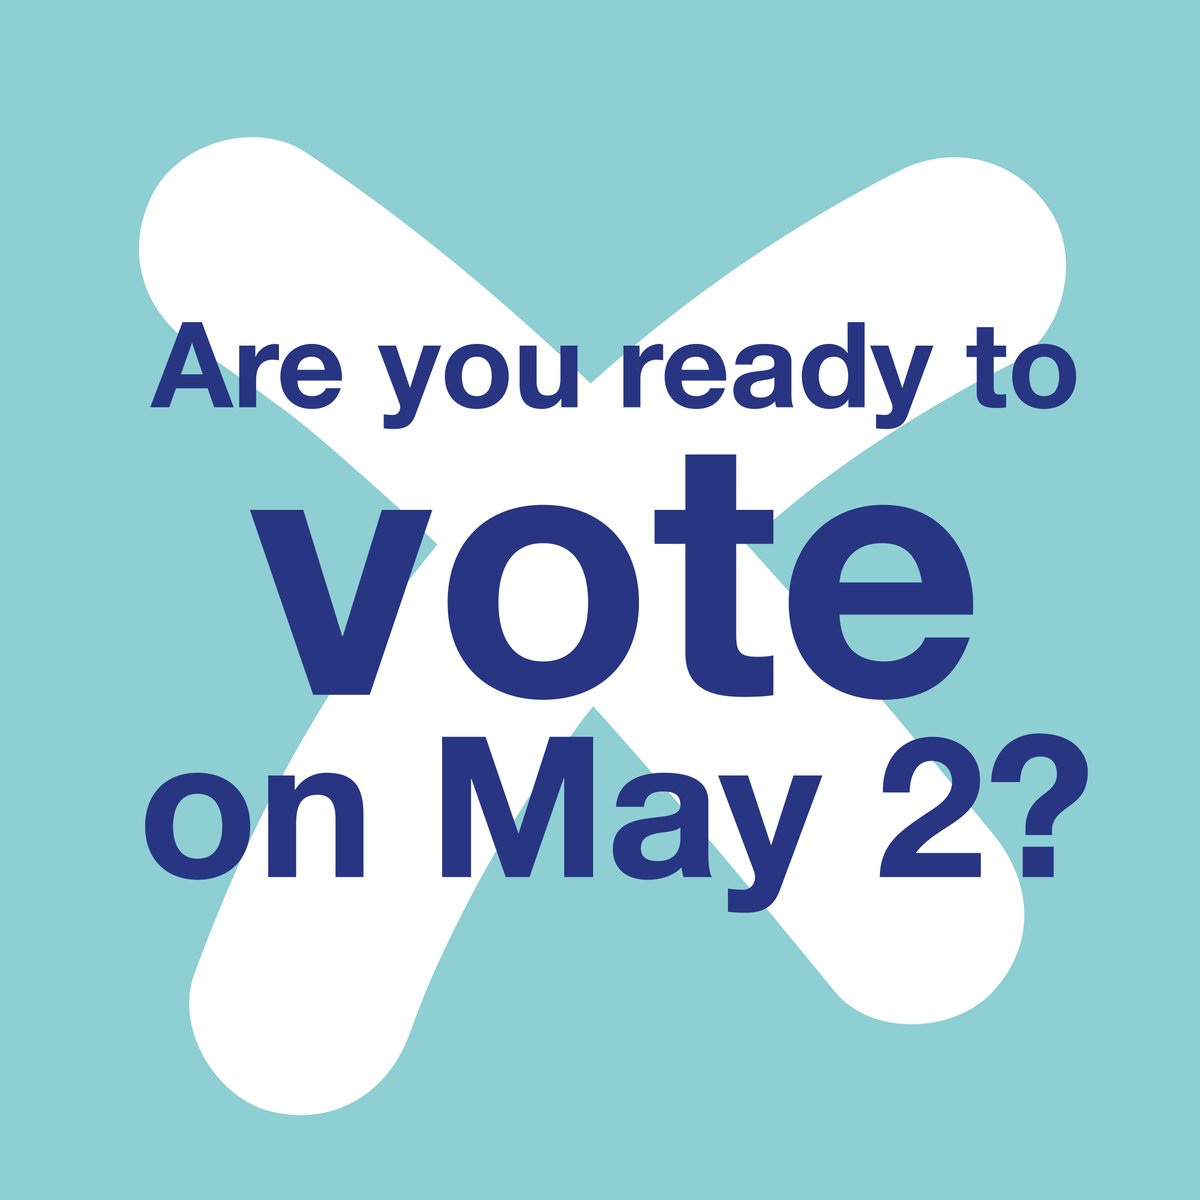 🗓️ Last chance // 5pm Wed is the deadline to apply for a proxy vote (someone votes on your behalf) or free voter ID (if you don't have a valid photo ID): Elections on 2 May are for the Liverpool City Region Mayor & Merseyside Police & Crime Commissioner. wirralview.com/council-update…